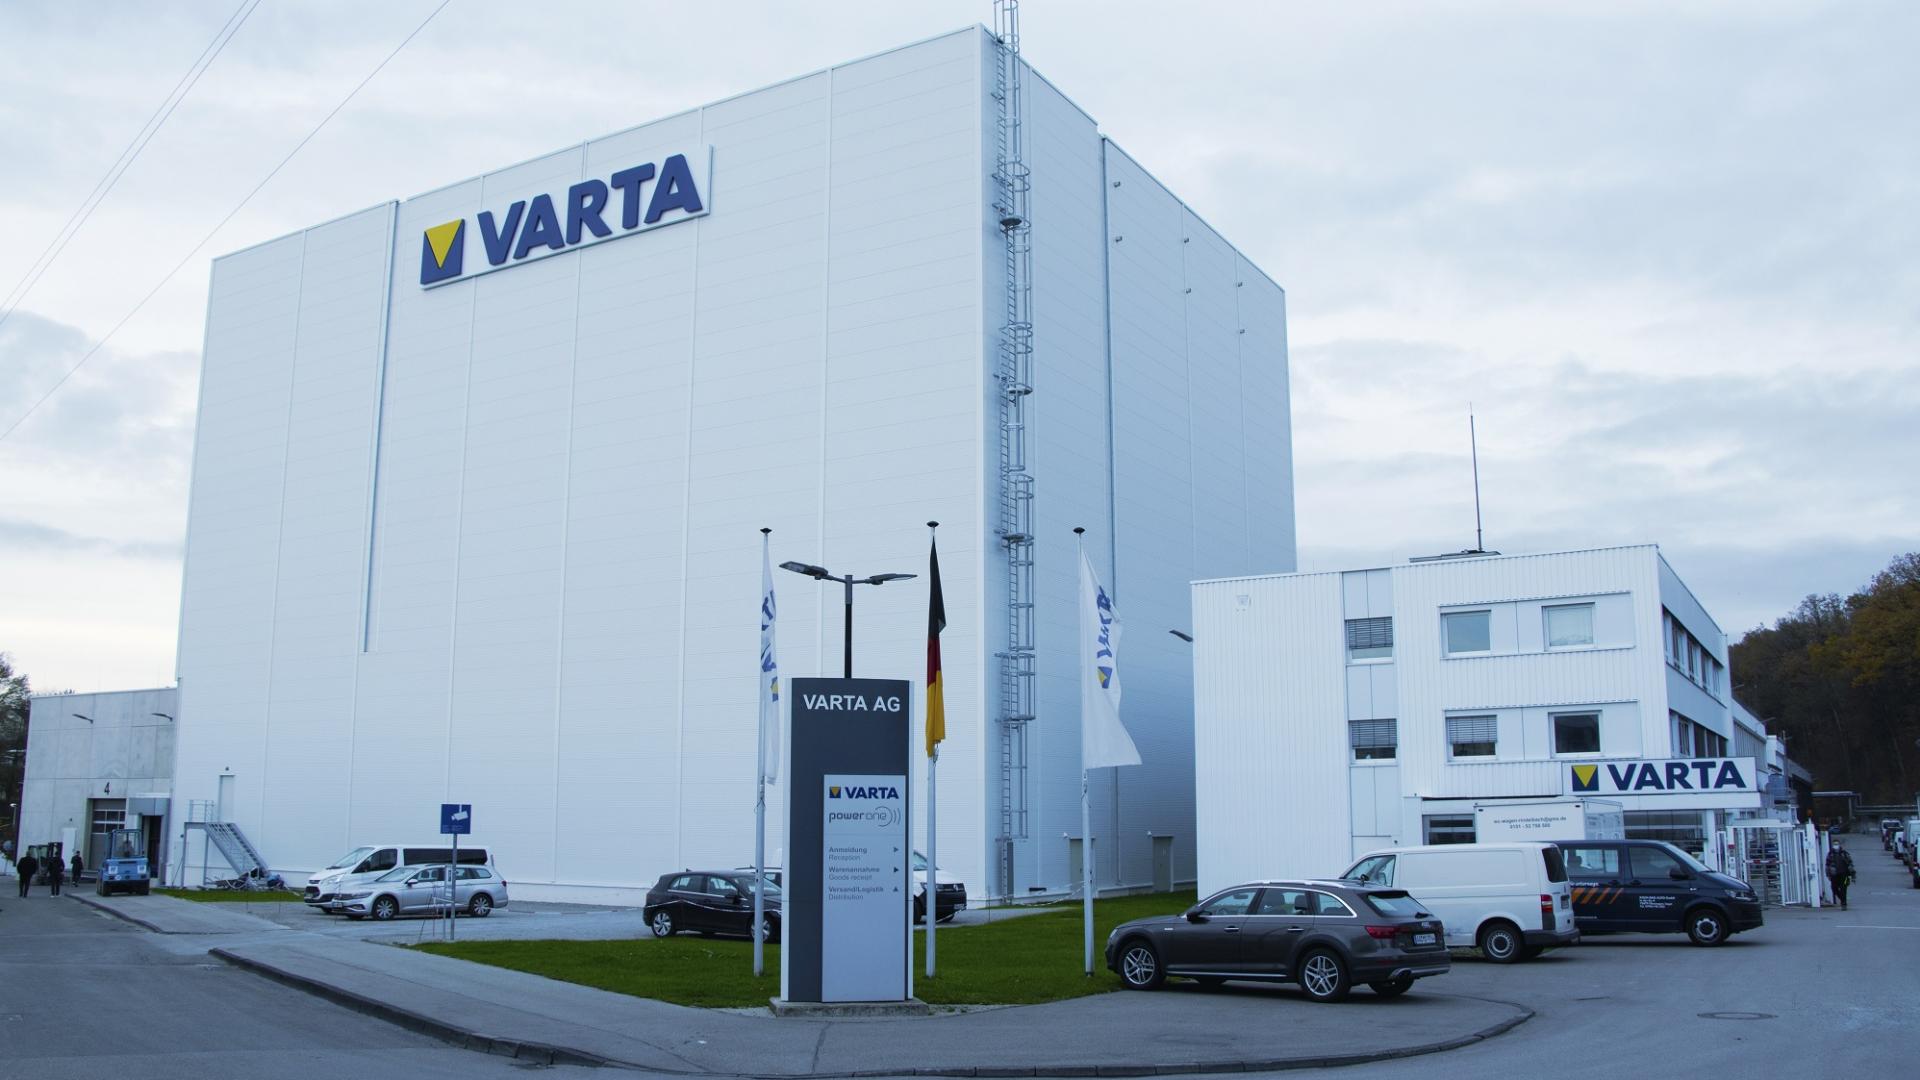 Exterior view of the viastore high-bay warehouse from VARTA Microbattery in Ellwangen 